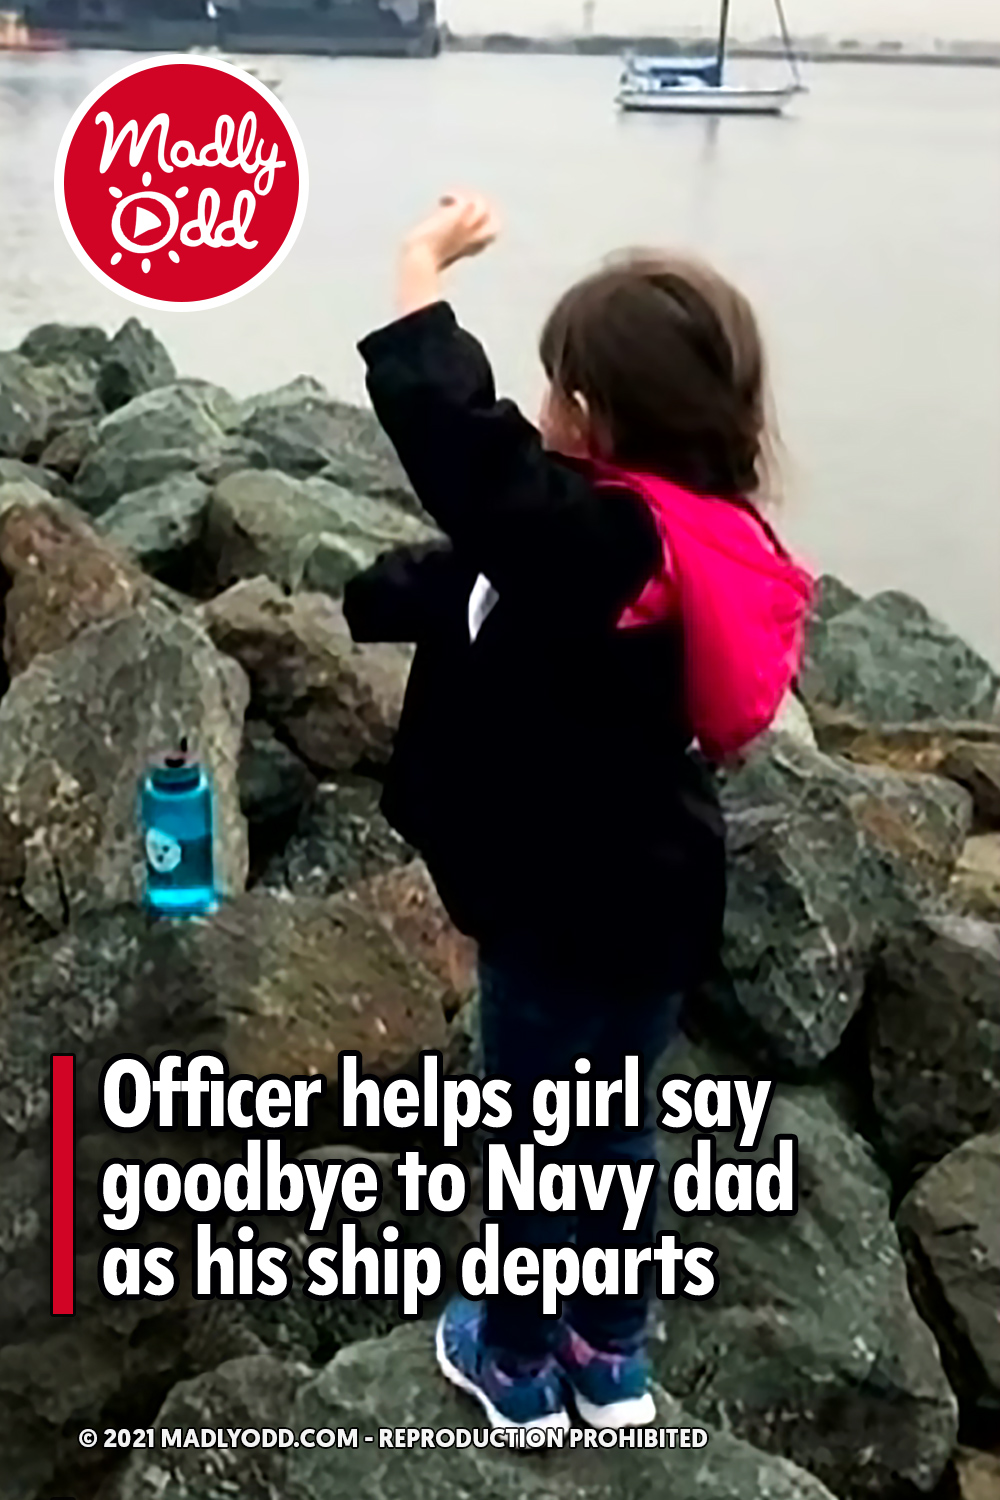 Officer helps girl say goodbye to Navy dad as his ship departs